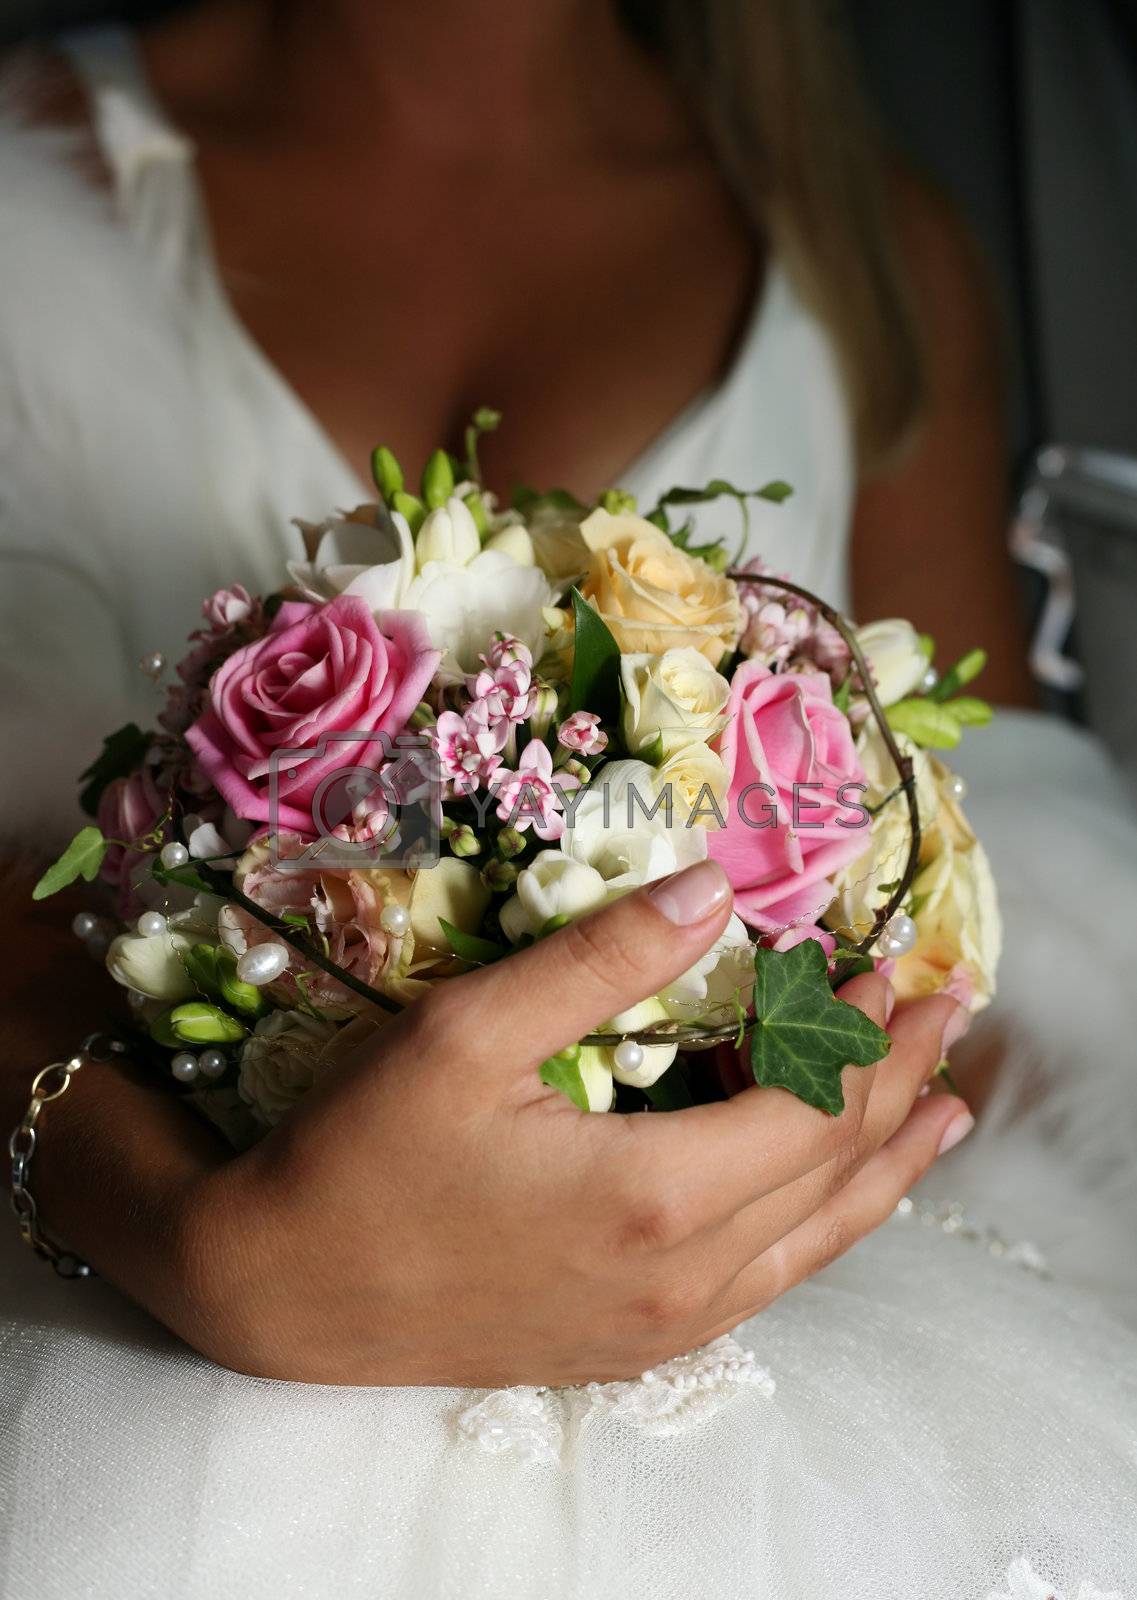 Royalty free image of Wedding bouquet by friday